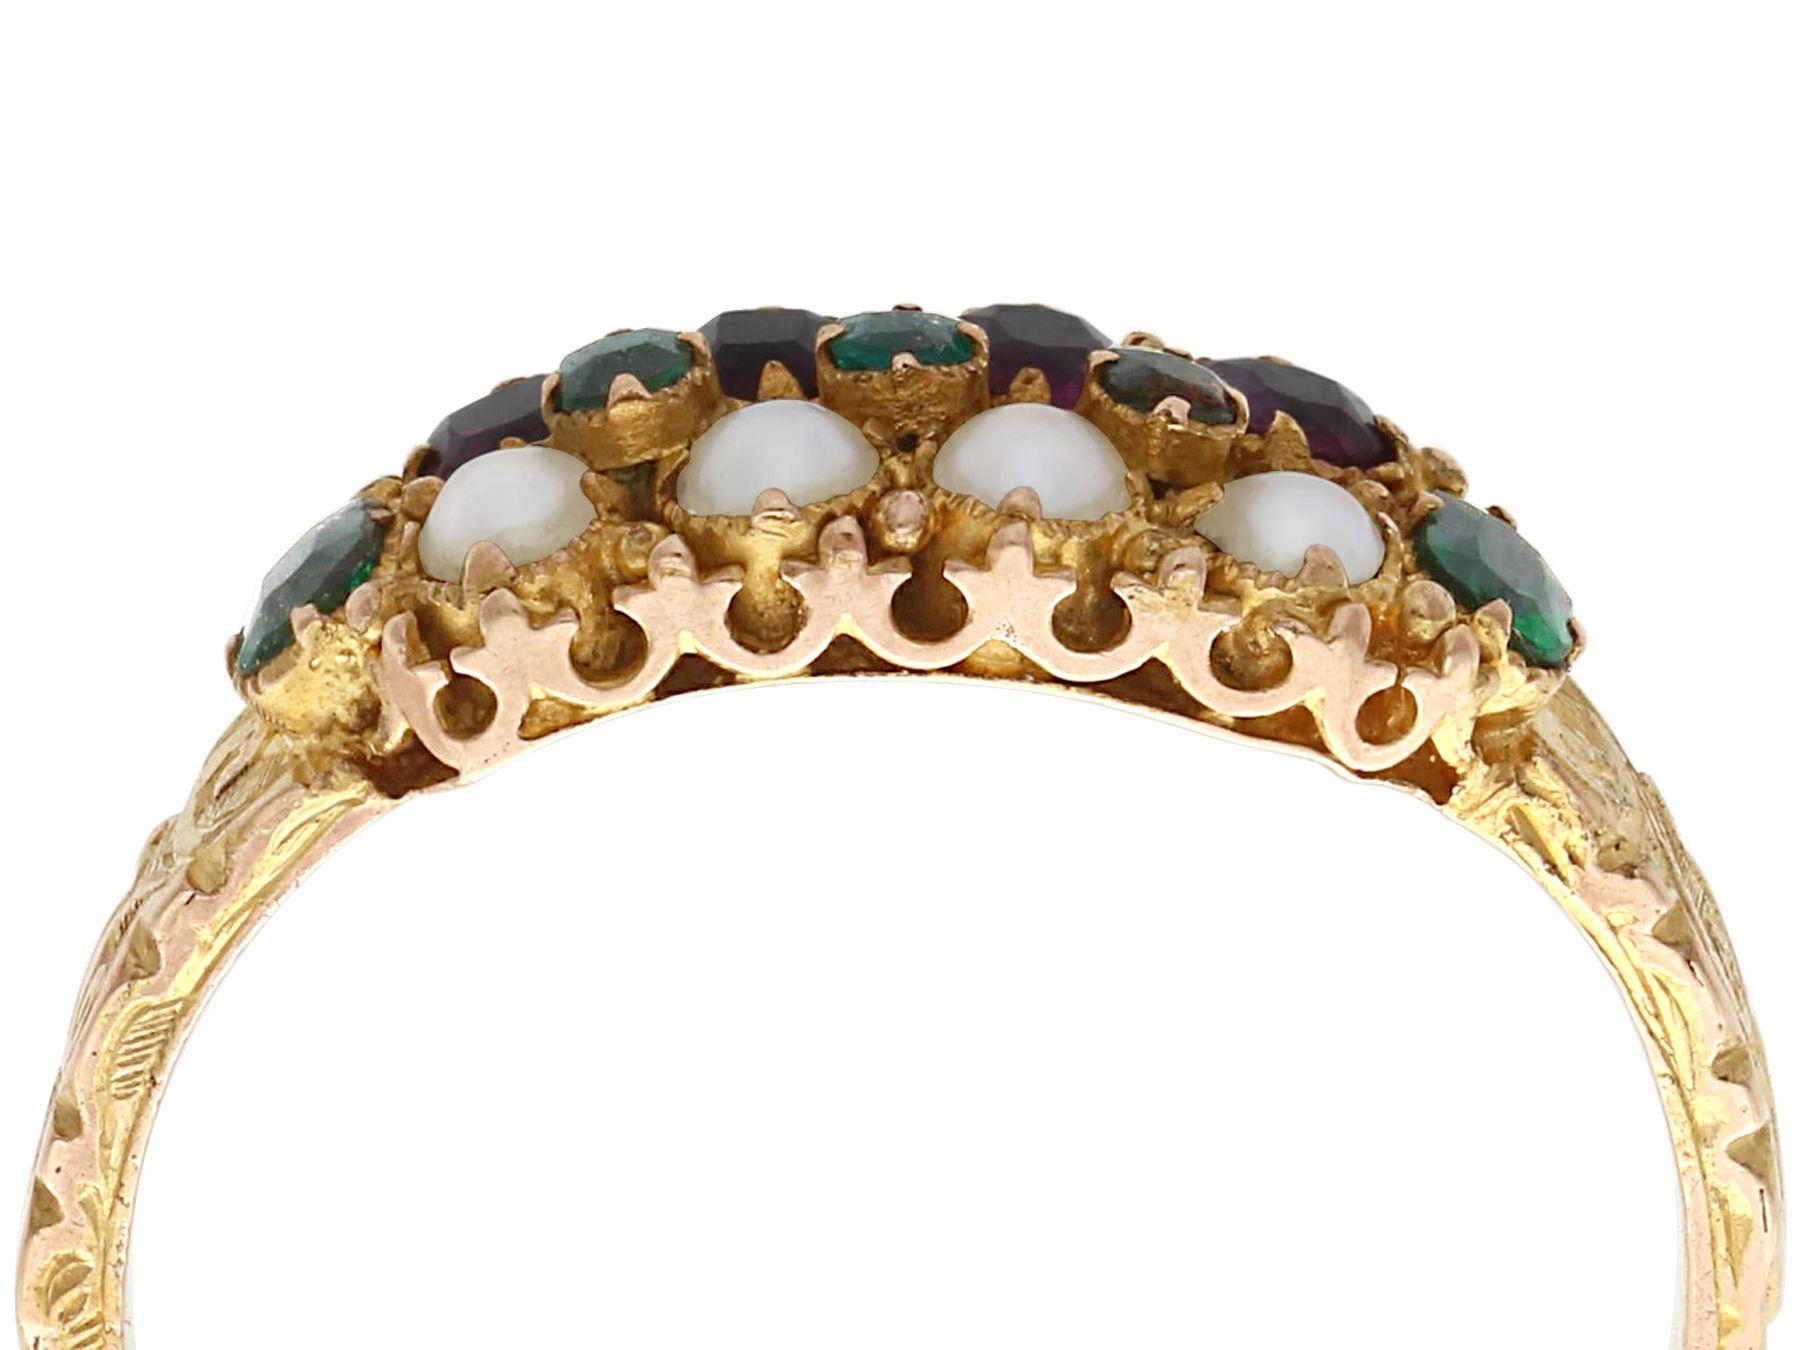 An impressive Victorian seed pearl and 0.13 carat emerald, 0.20 carat amethyst and 15 karat yellow gold dress ring; part of our diverse Victorian jewelry collections.

This fine and impressive antique Victorian ring has been crafted in 15k yellow